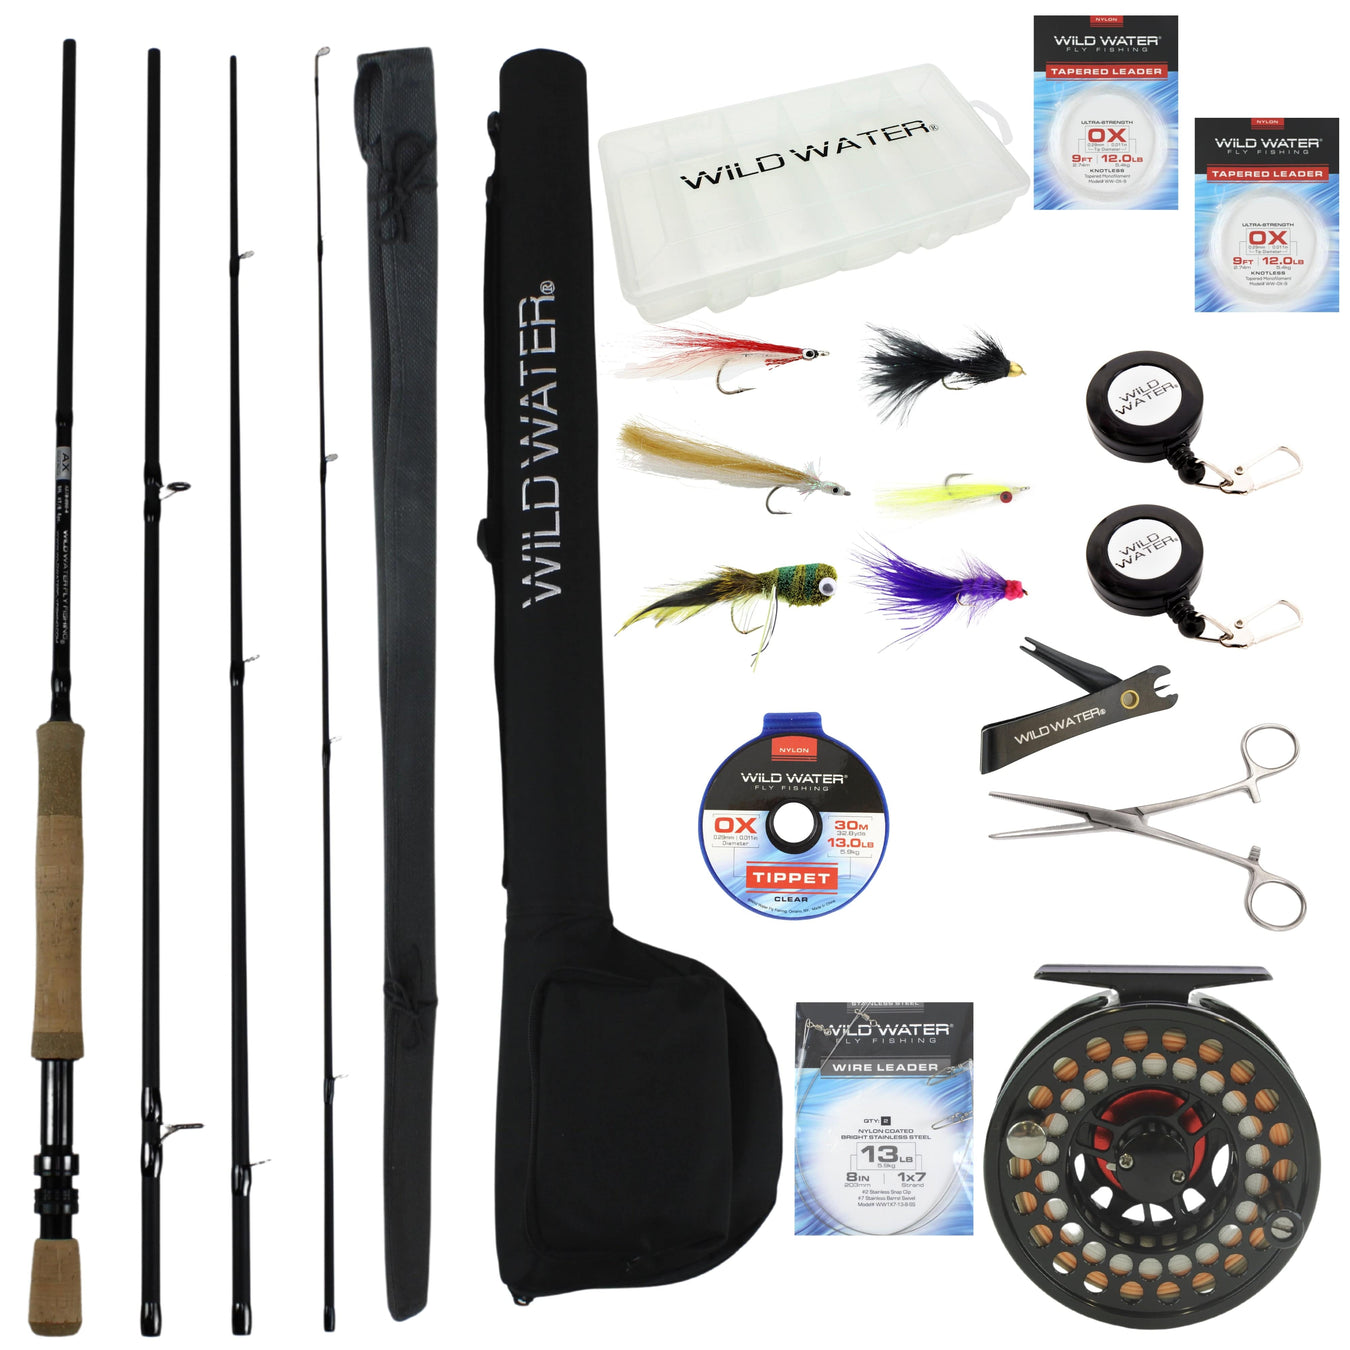 7-Weight Fly Fishing Kits